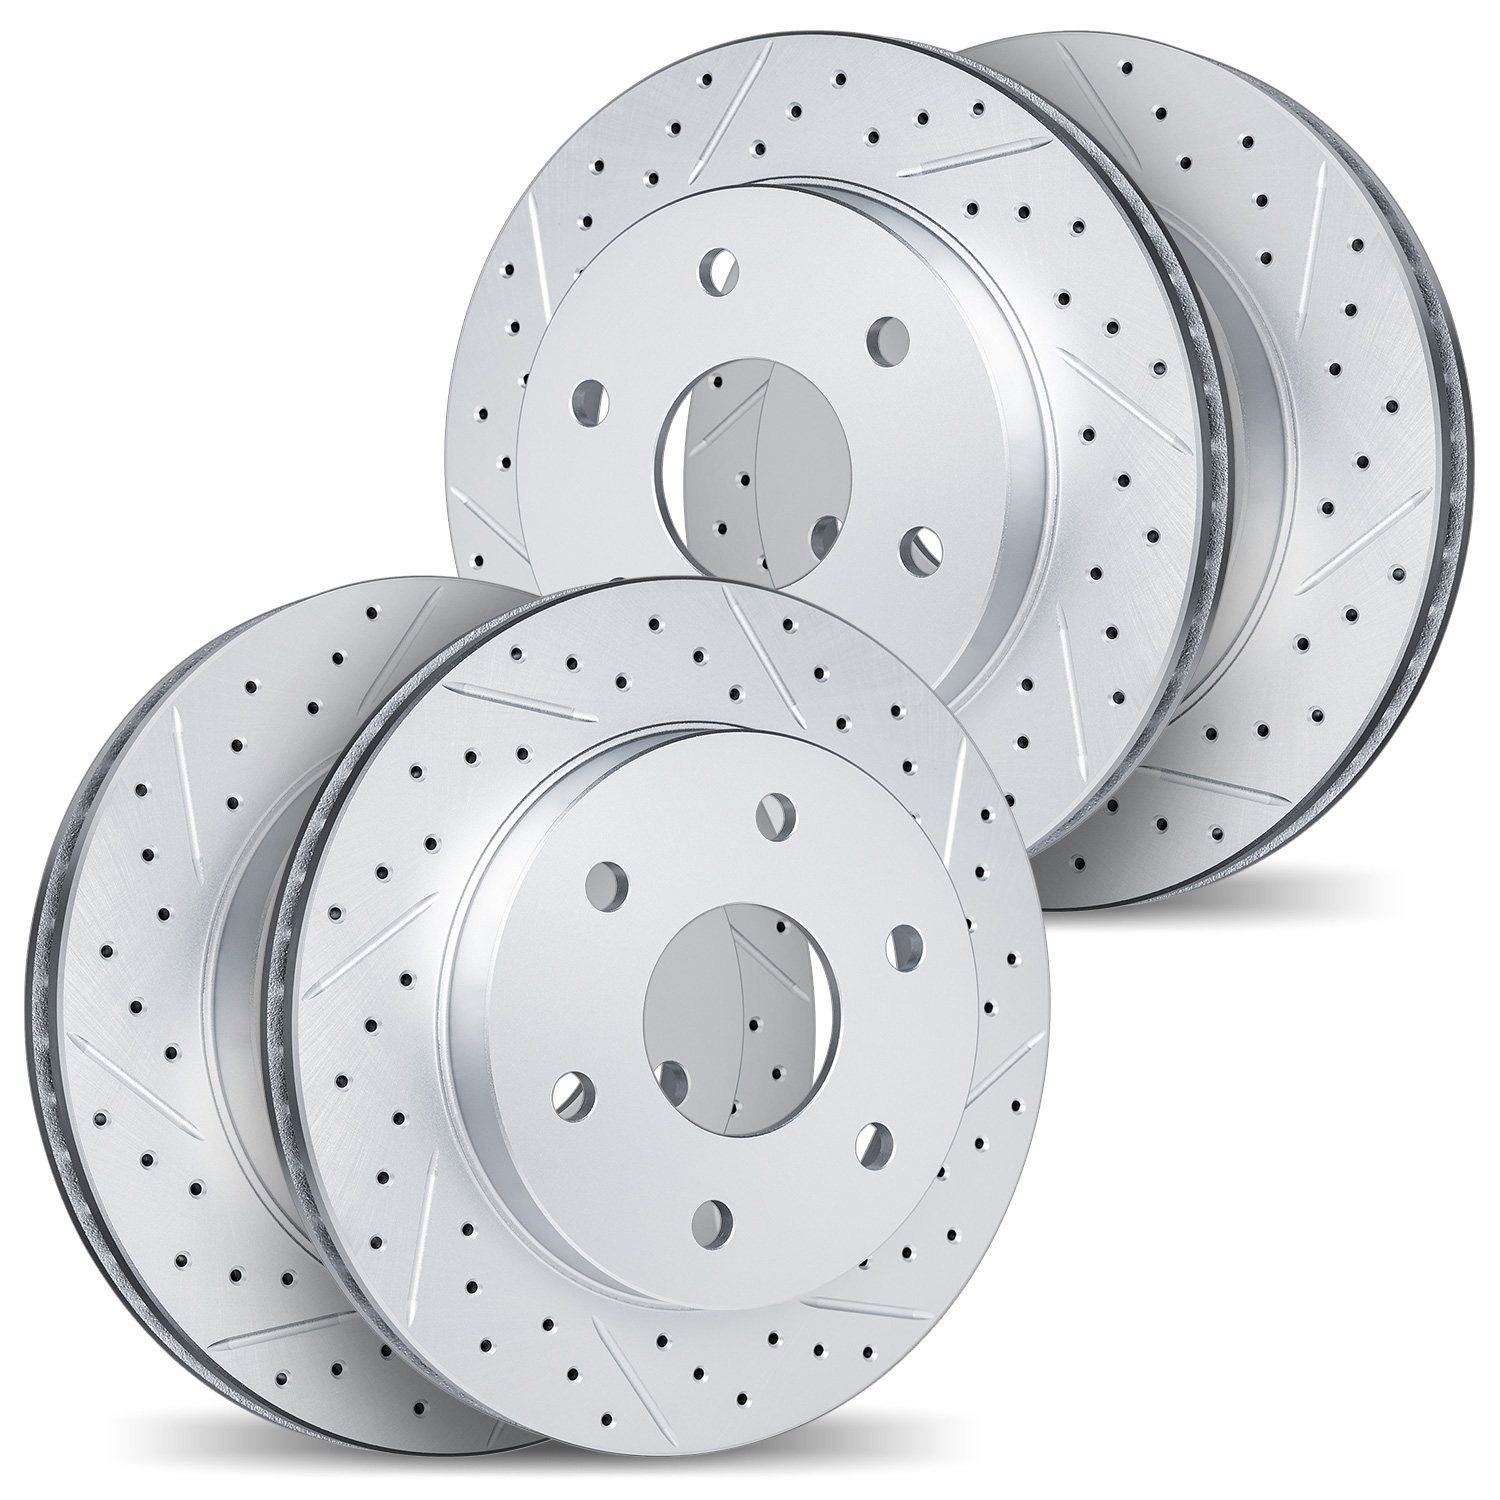 2004-67039 Geoperformance Drilled/Slotted Brake Rotors, 2005-2021 Multiple Makes/Models, Position: Front and Rear